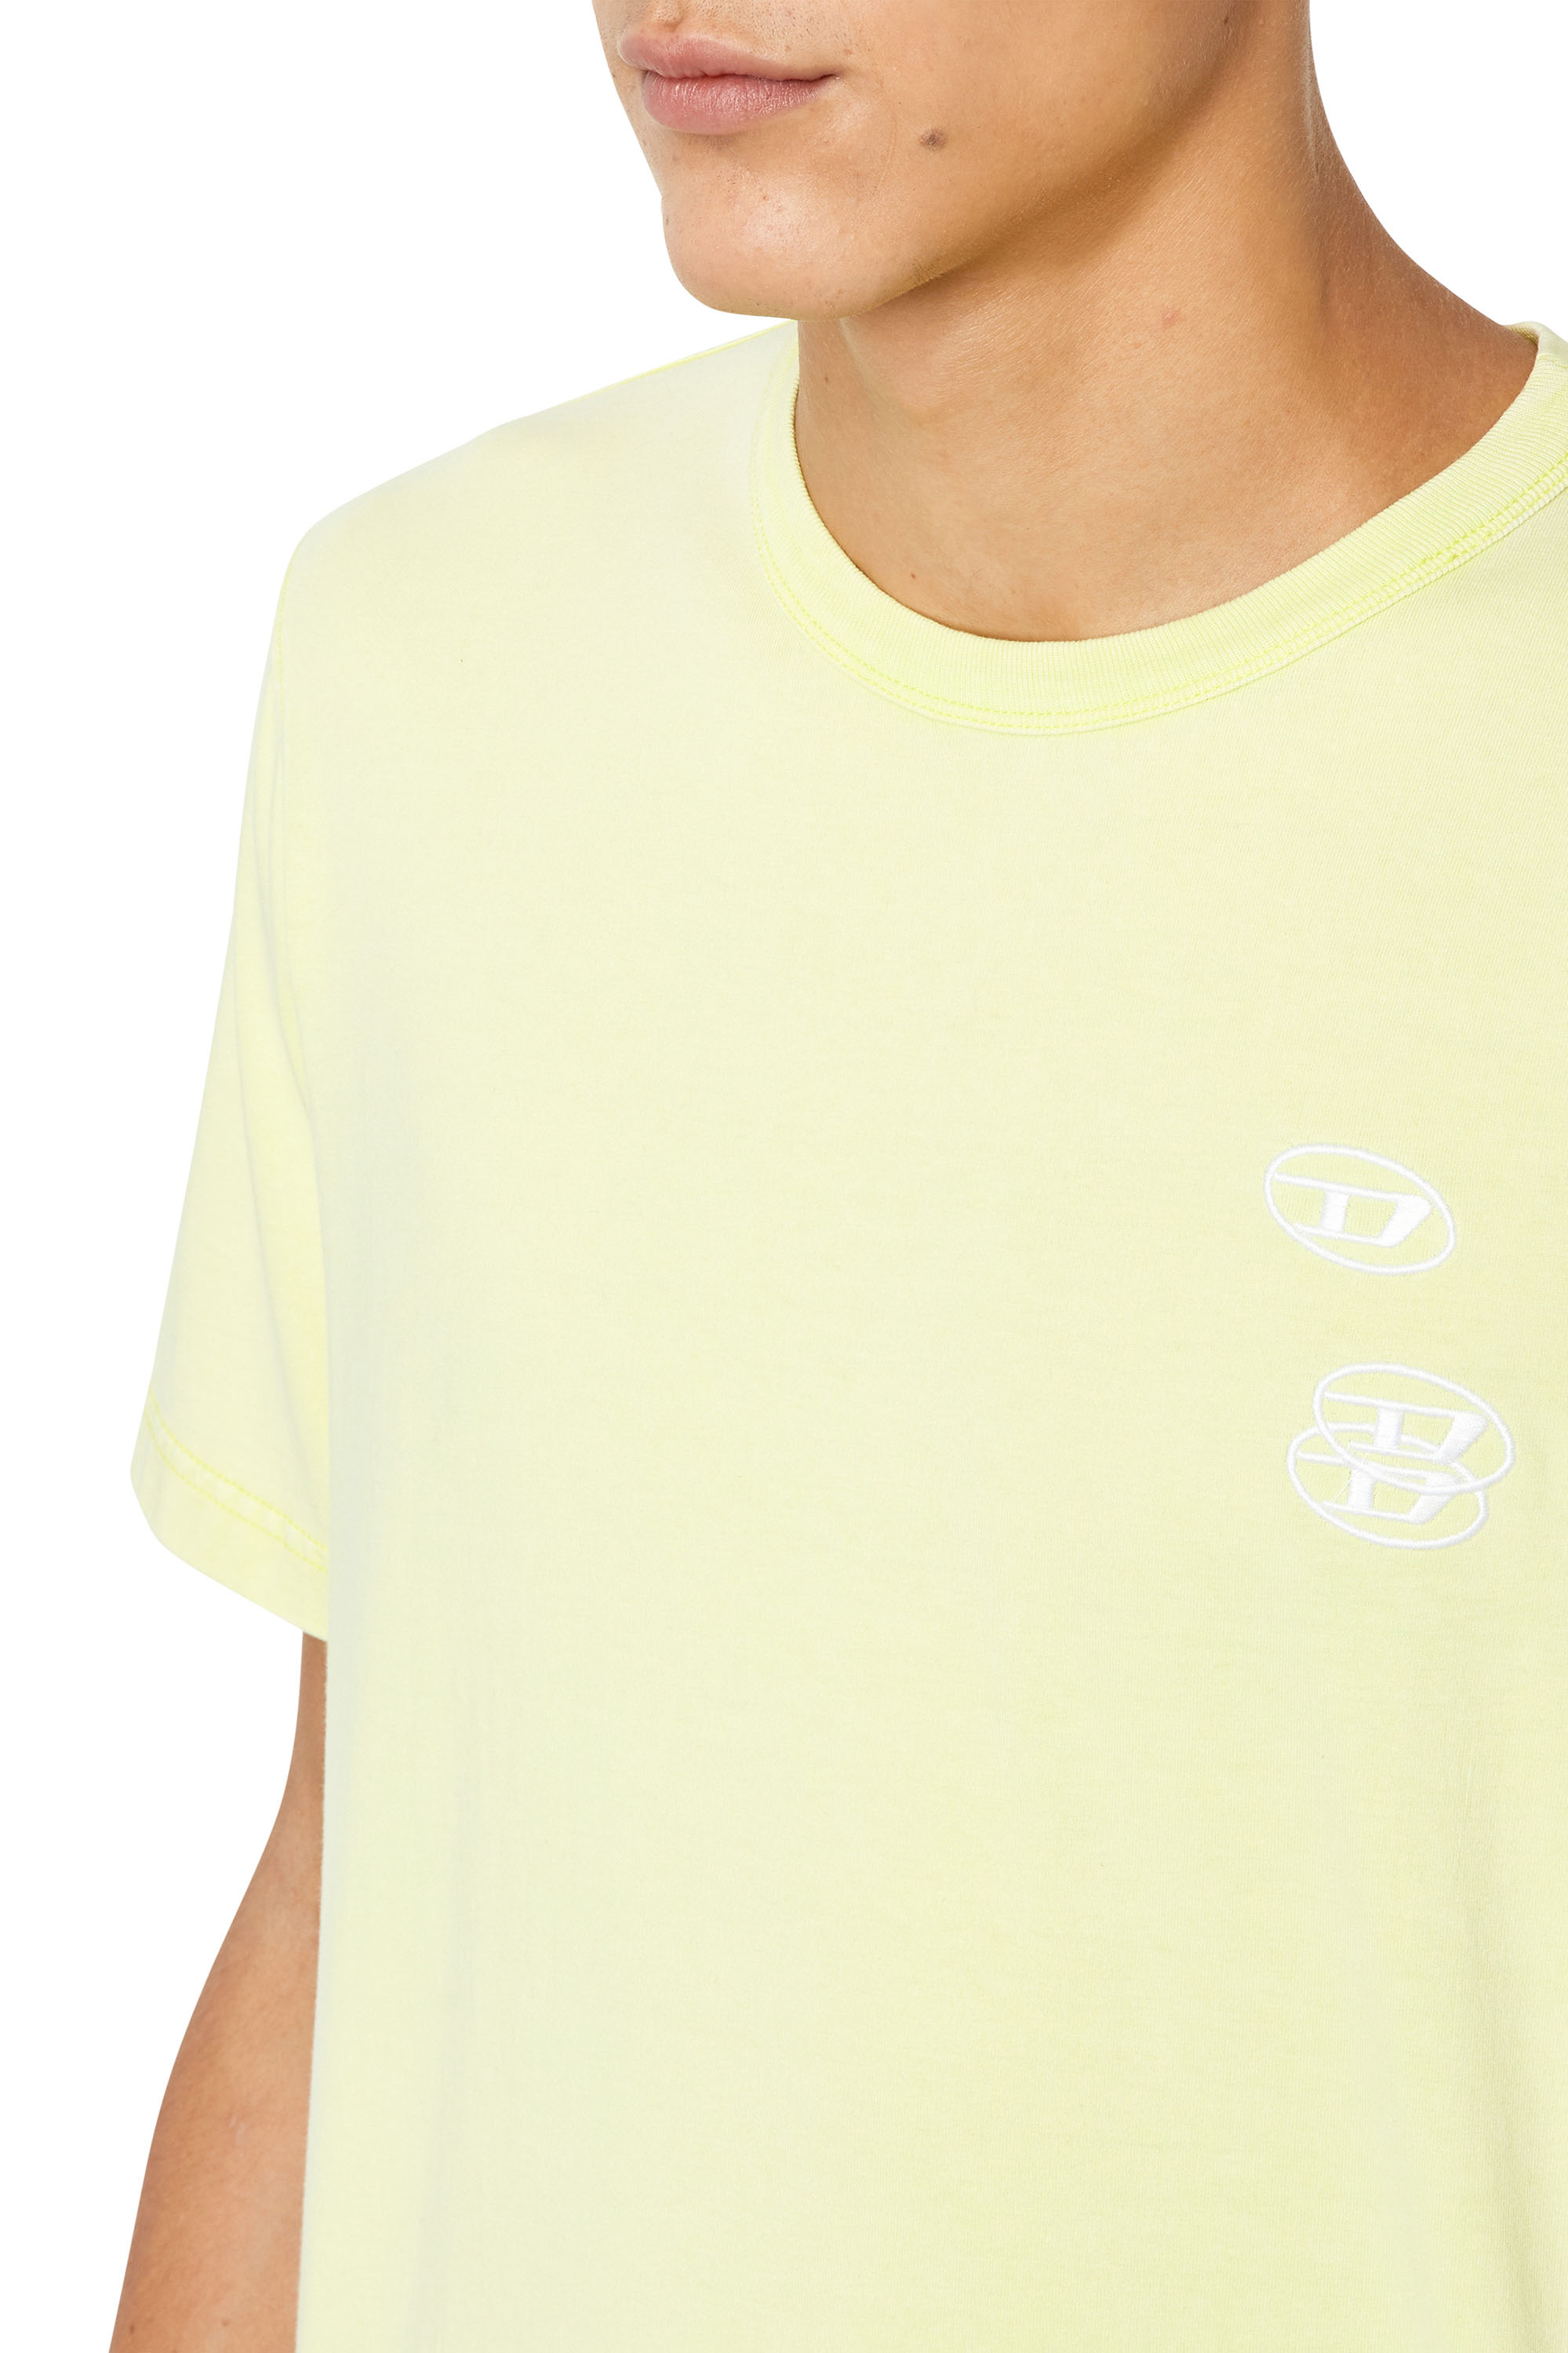 Diesel - T-JUST-G14, Yellow Fluo - Image 5